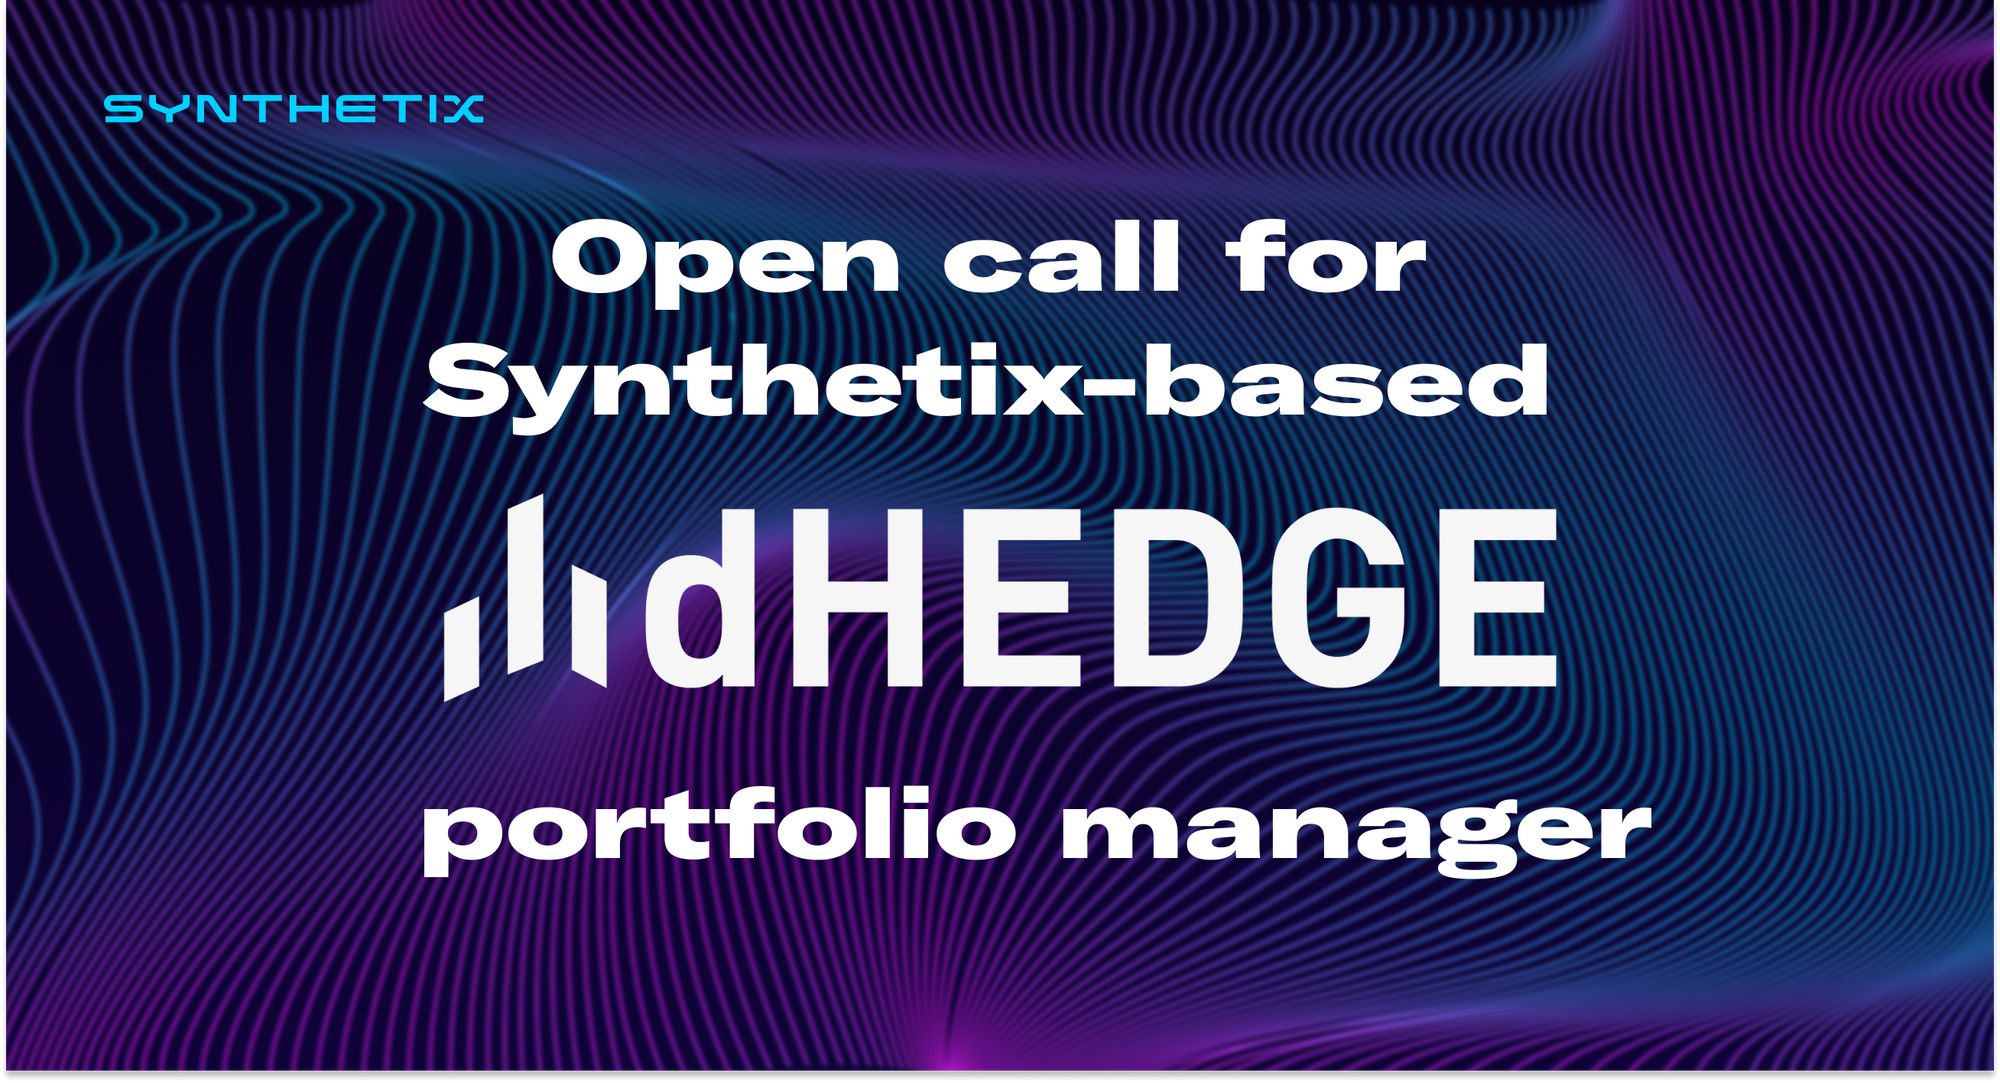 Synthetix to invest 100,000 sUSD in Synthetix-based dHEDGE portfolio manager